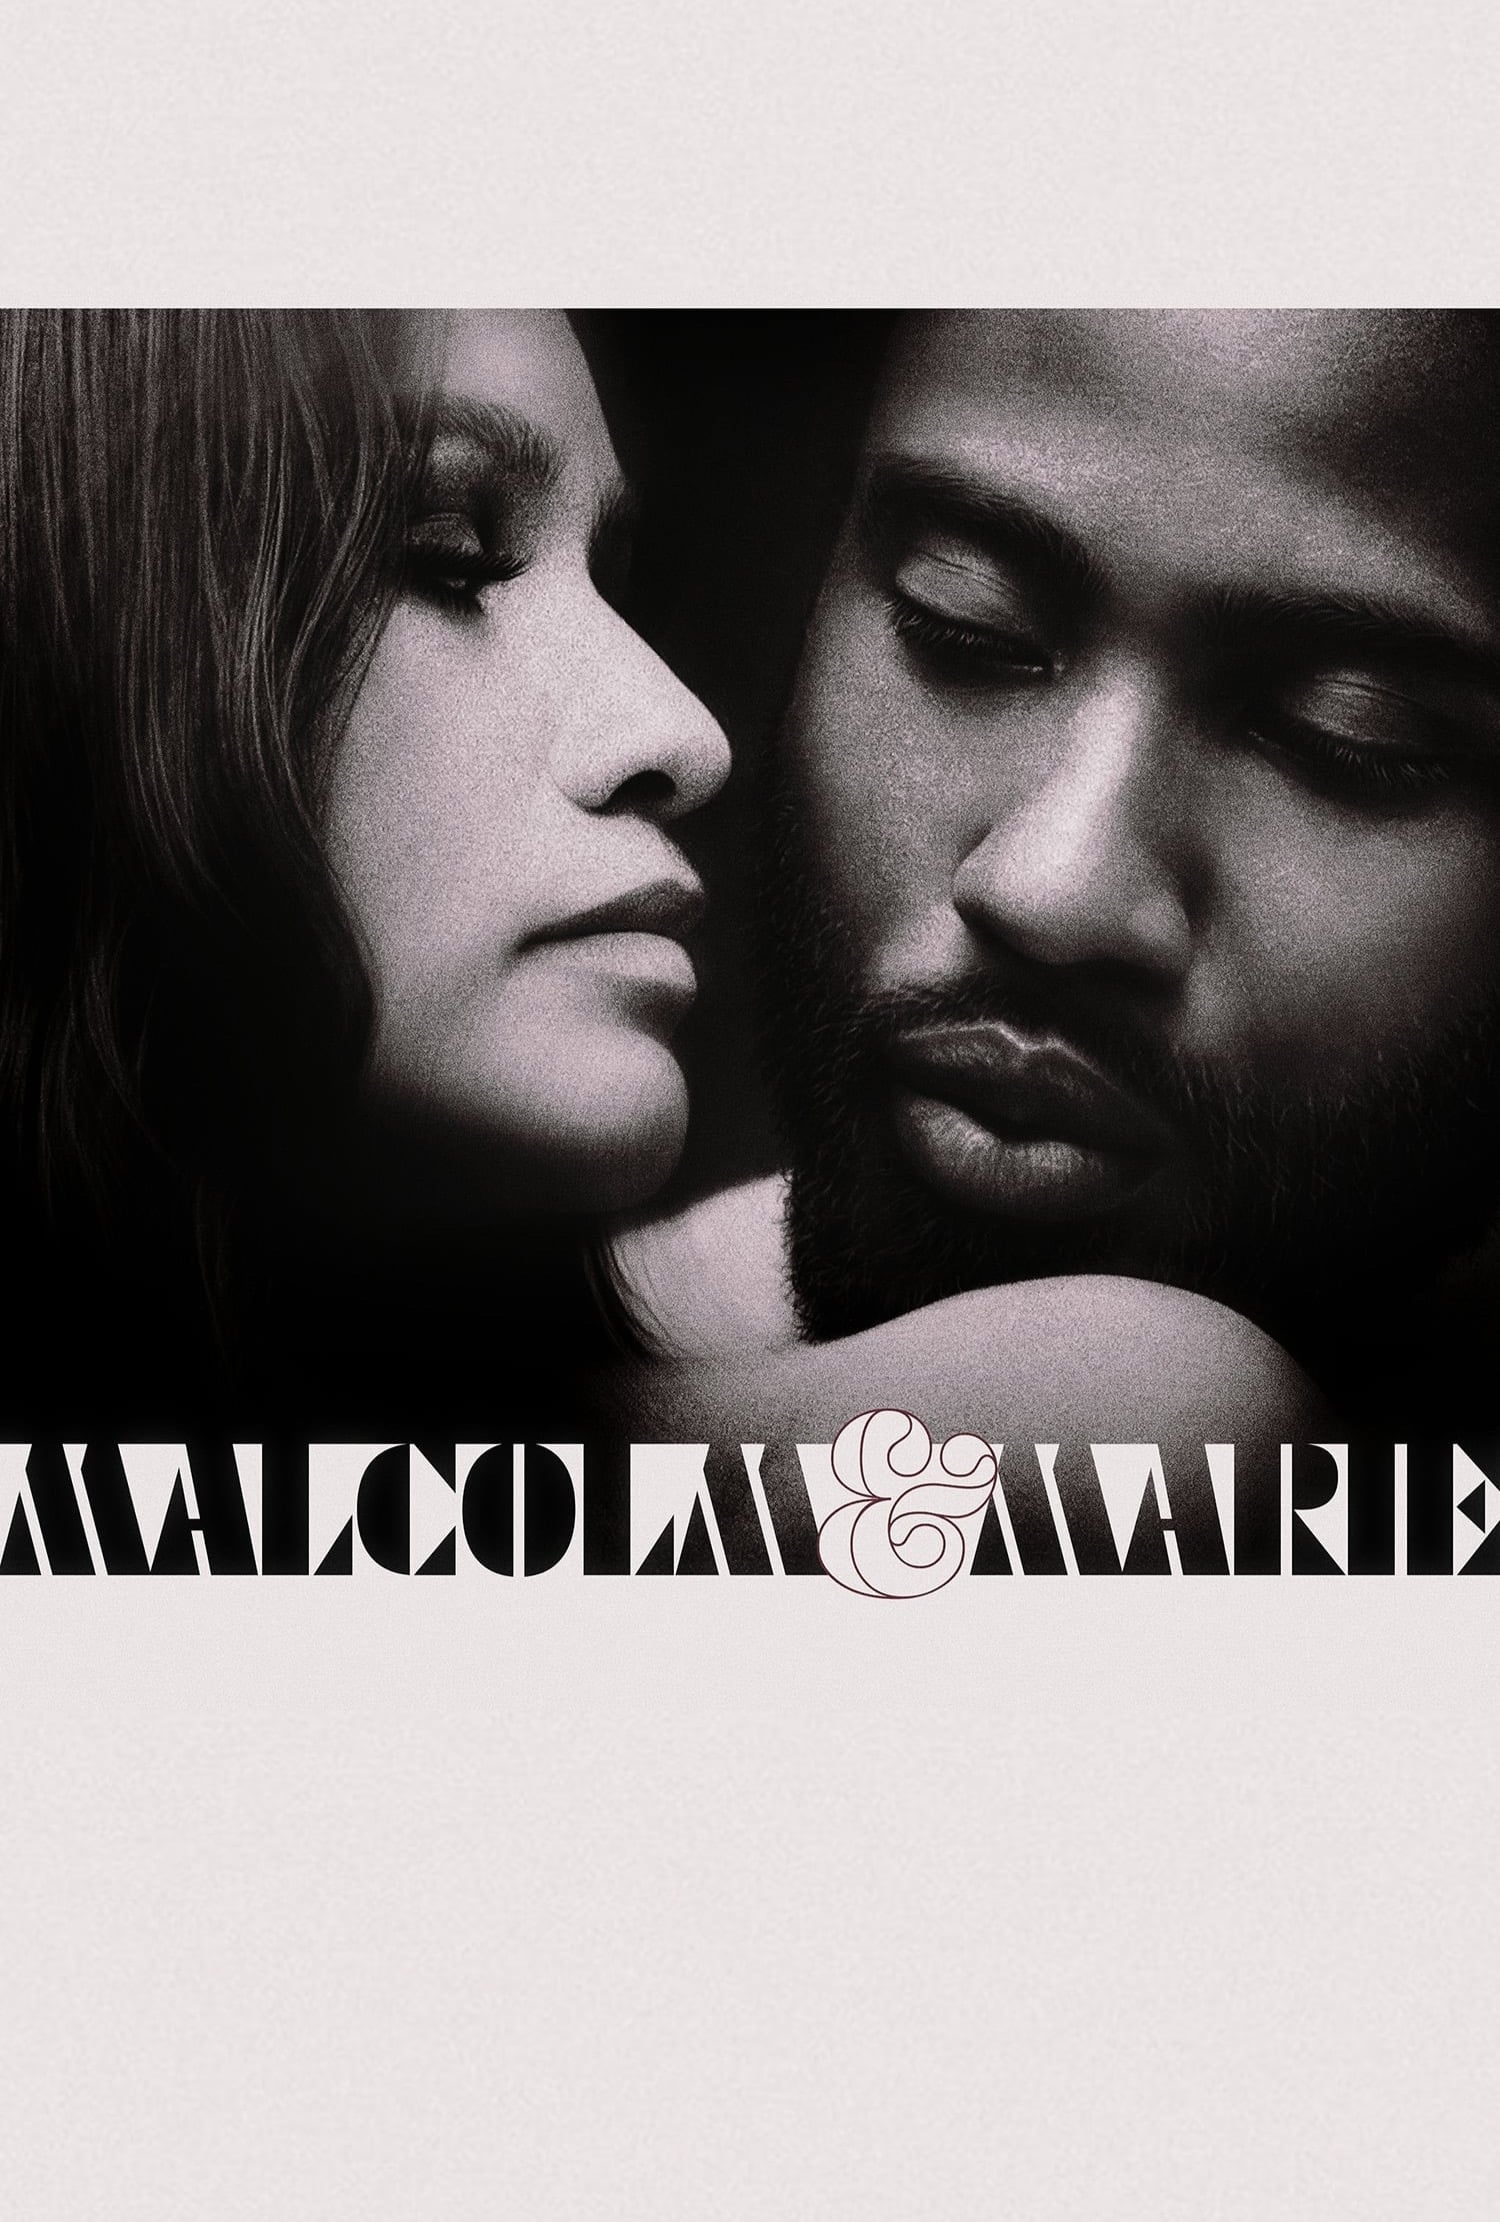 Malcolm & Marie Movie poster